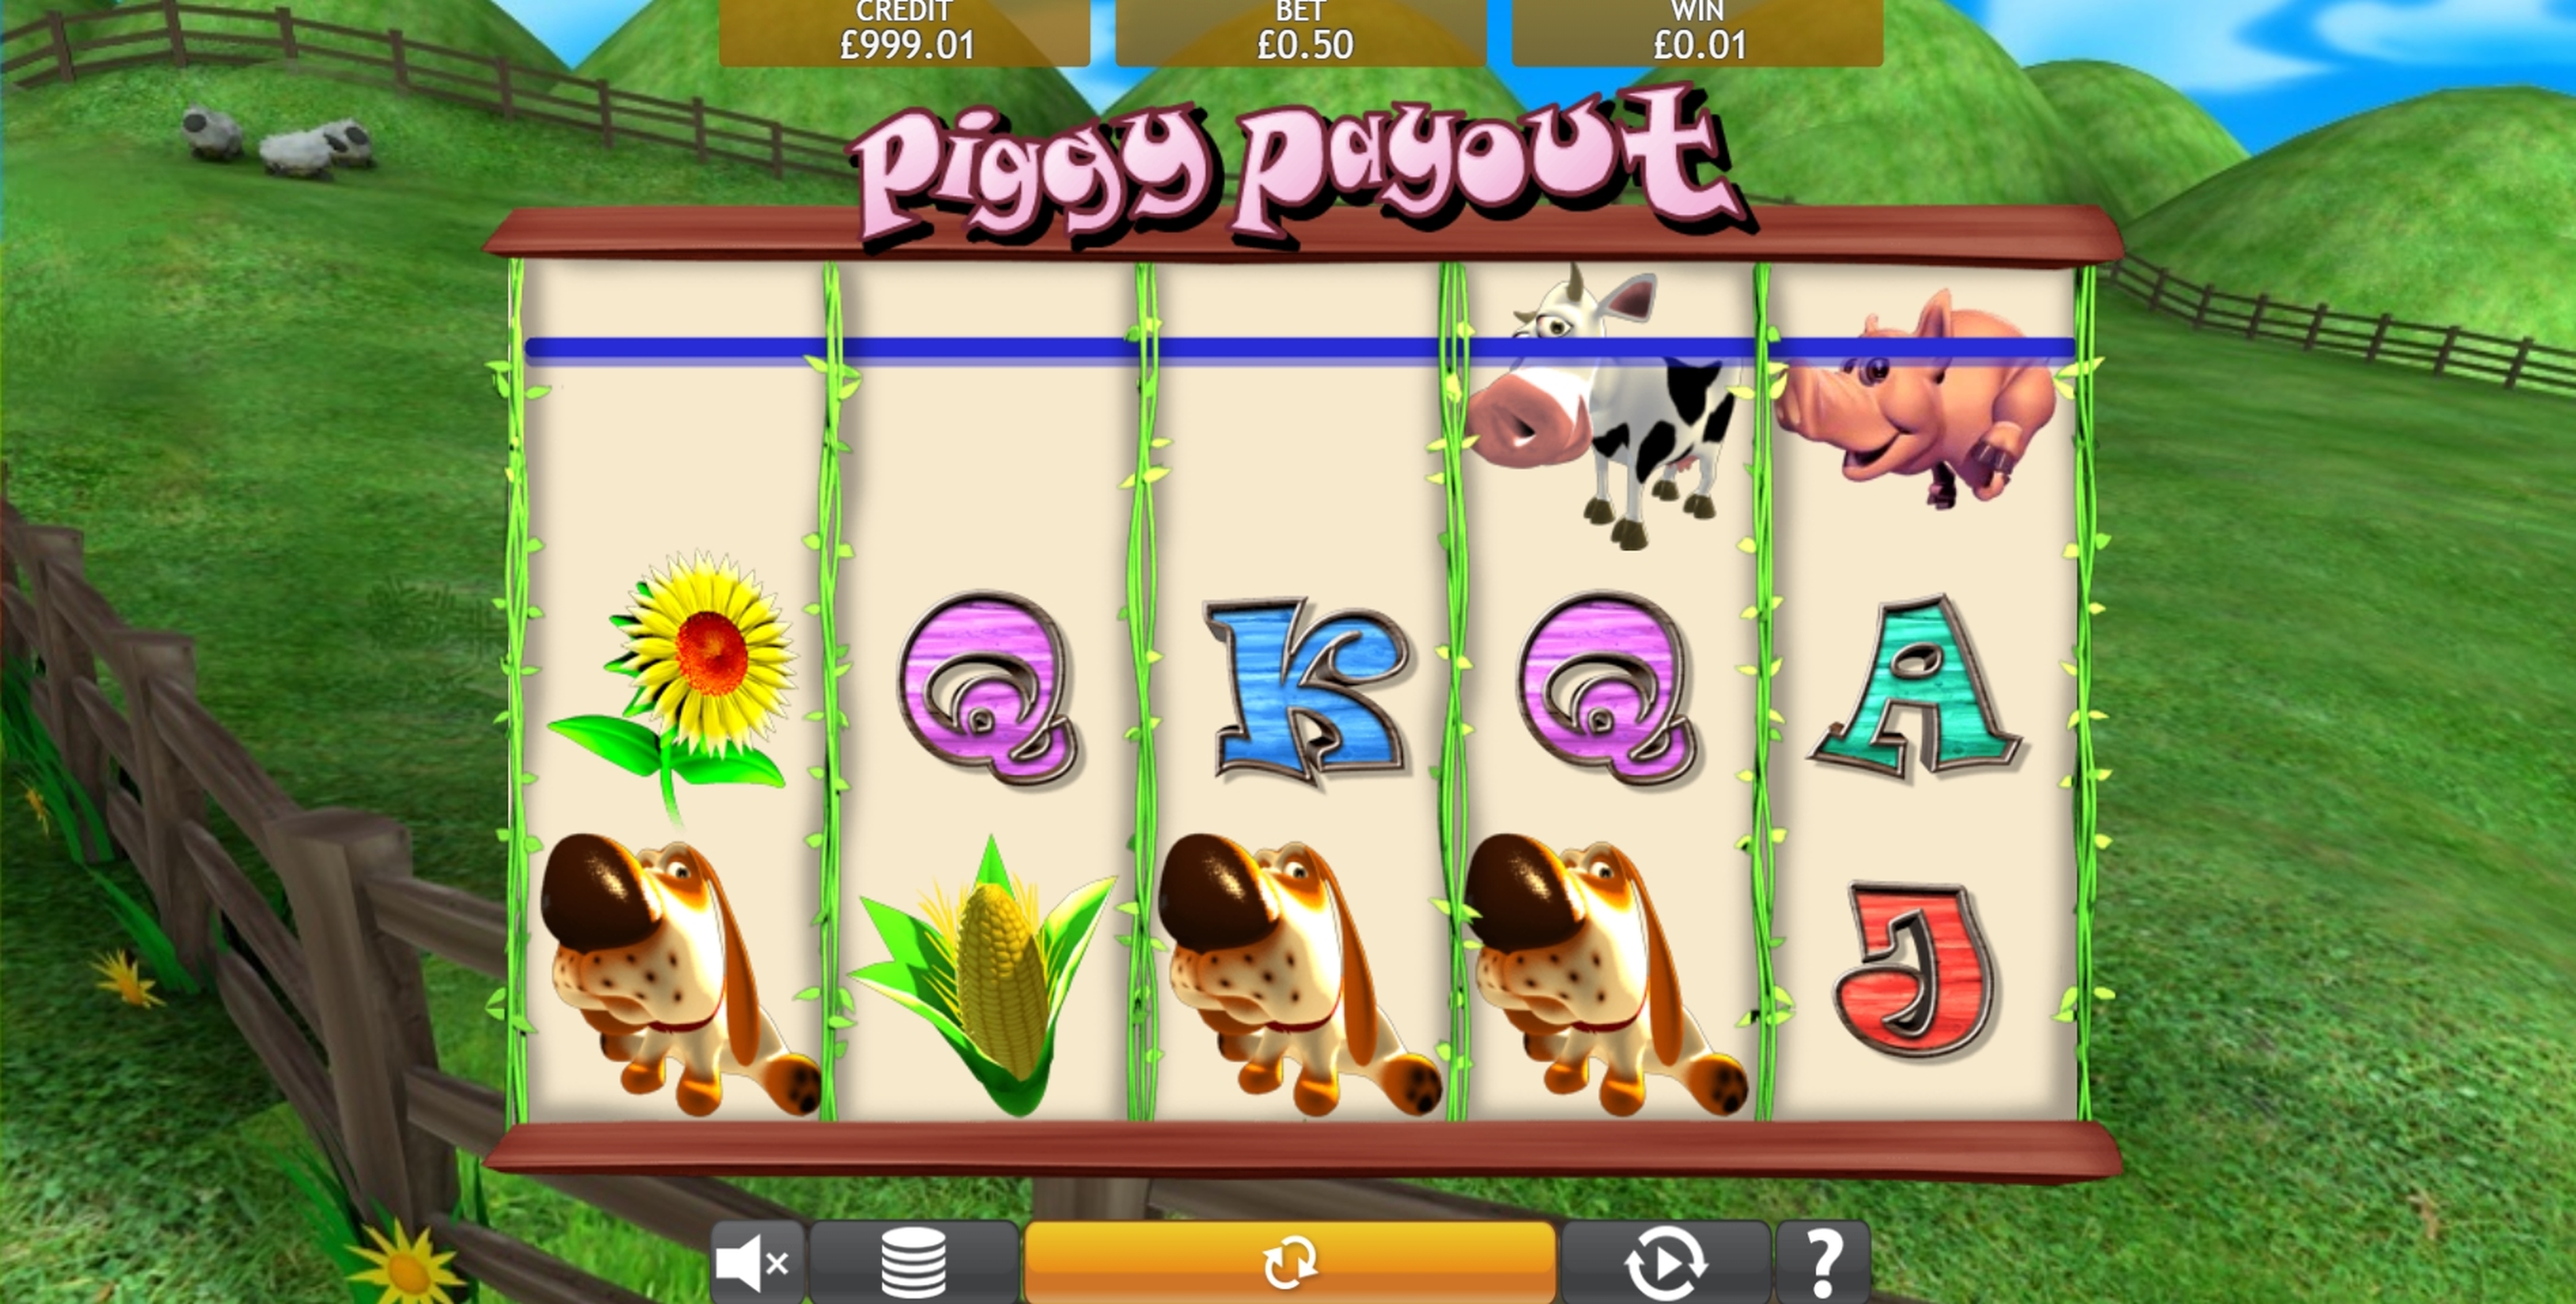 Win Money in Piggy Payout Free Slot Game by EYECON